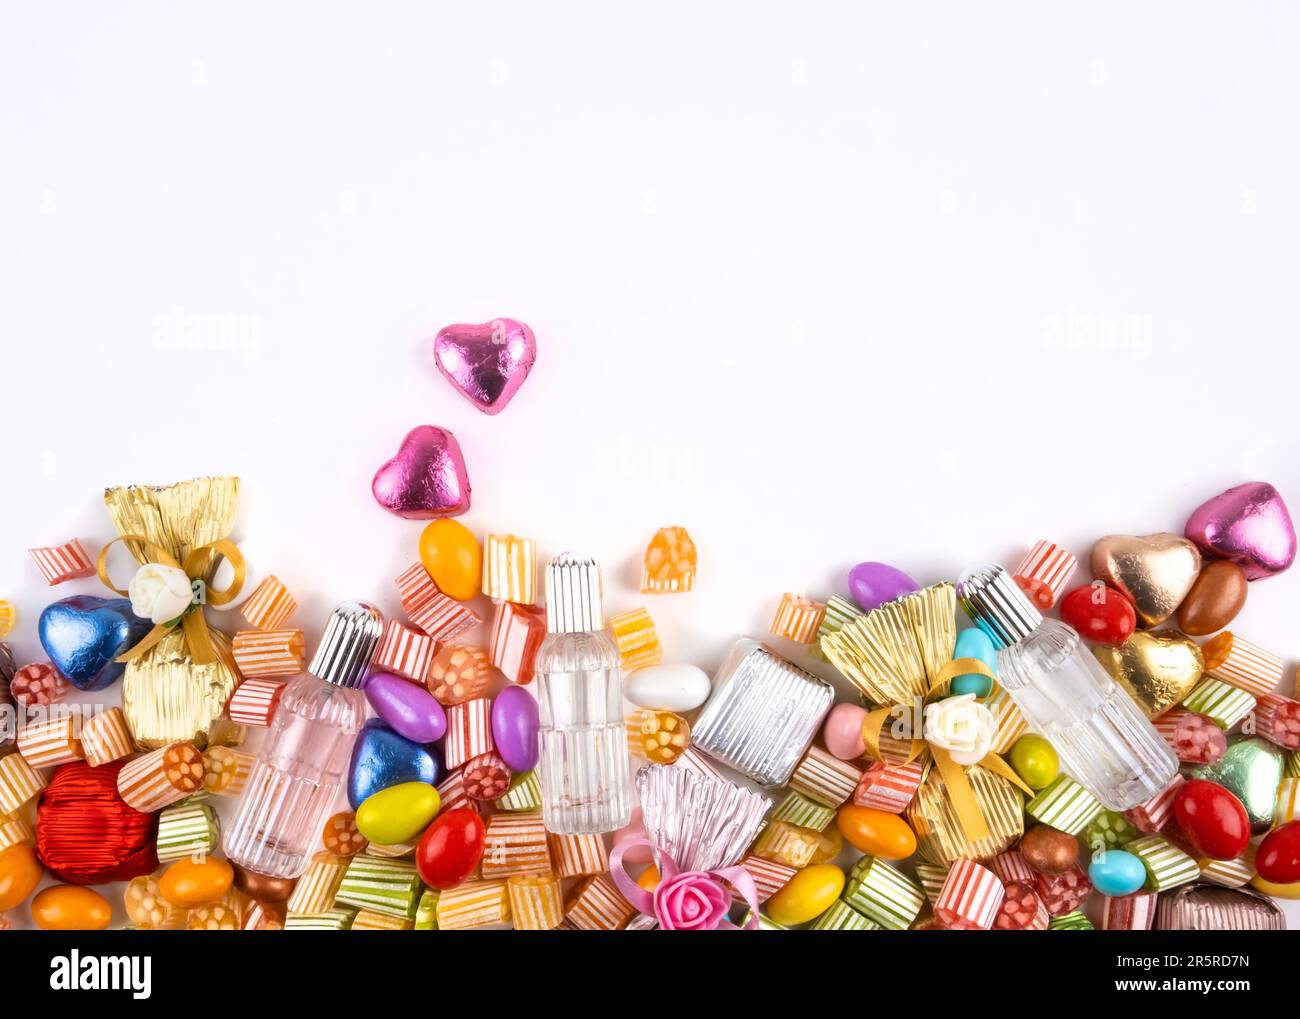 Top view half full various sweet assortment. Isolated white background, copy space. Candy, wrapped chocolate, hearth shape, almond, cologne mixed. Stock Photo